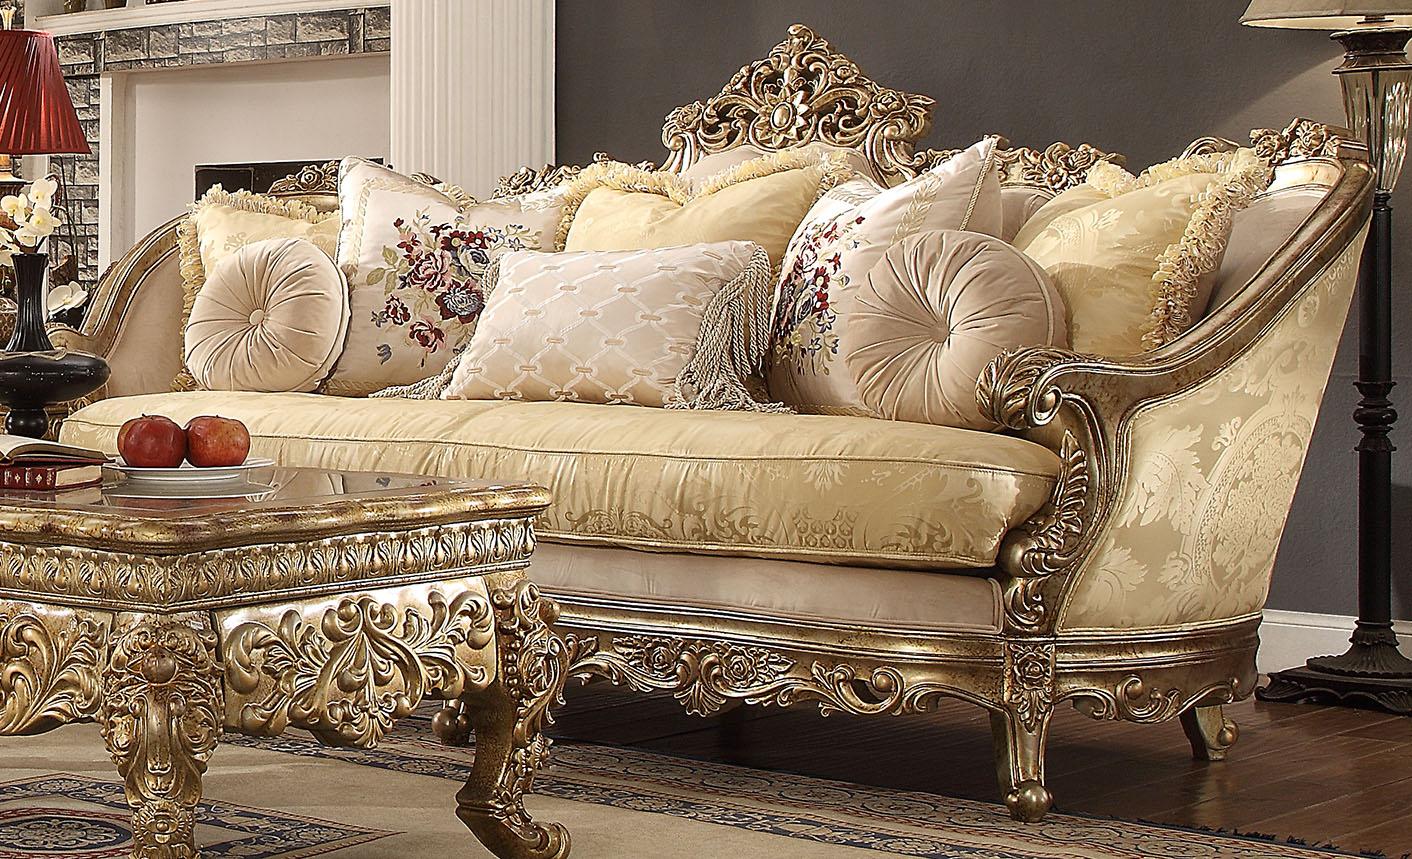 

    
Homey Design Furniture HD-2626/HD-1101 Sofa Loveseat Chair and Coffee Table Champagne/Gold HD-2626 Set-4
